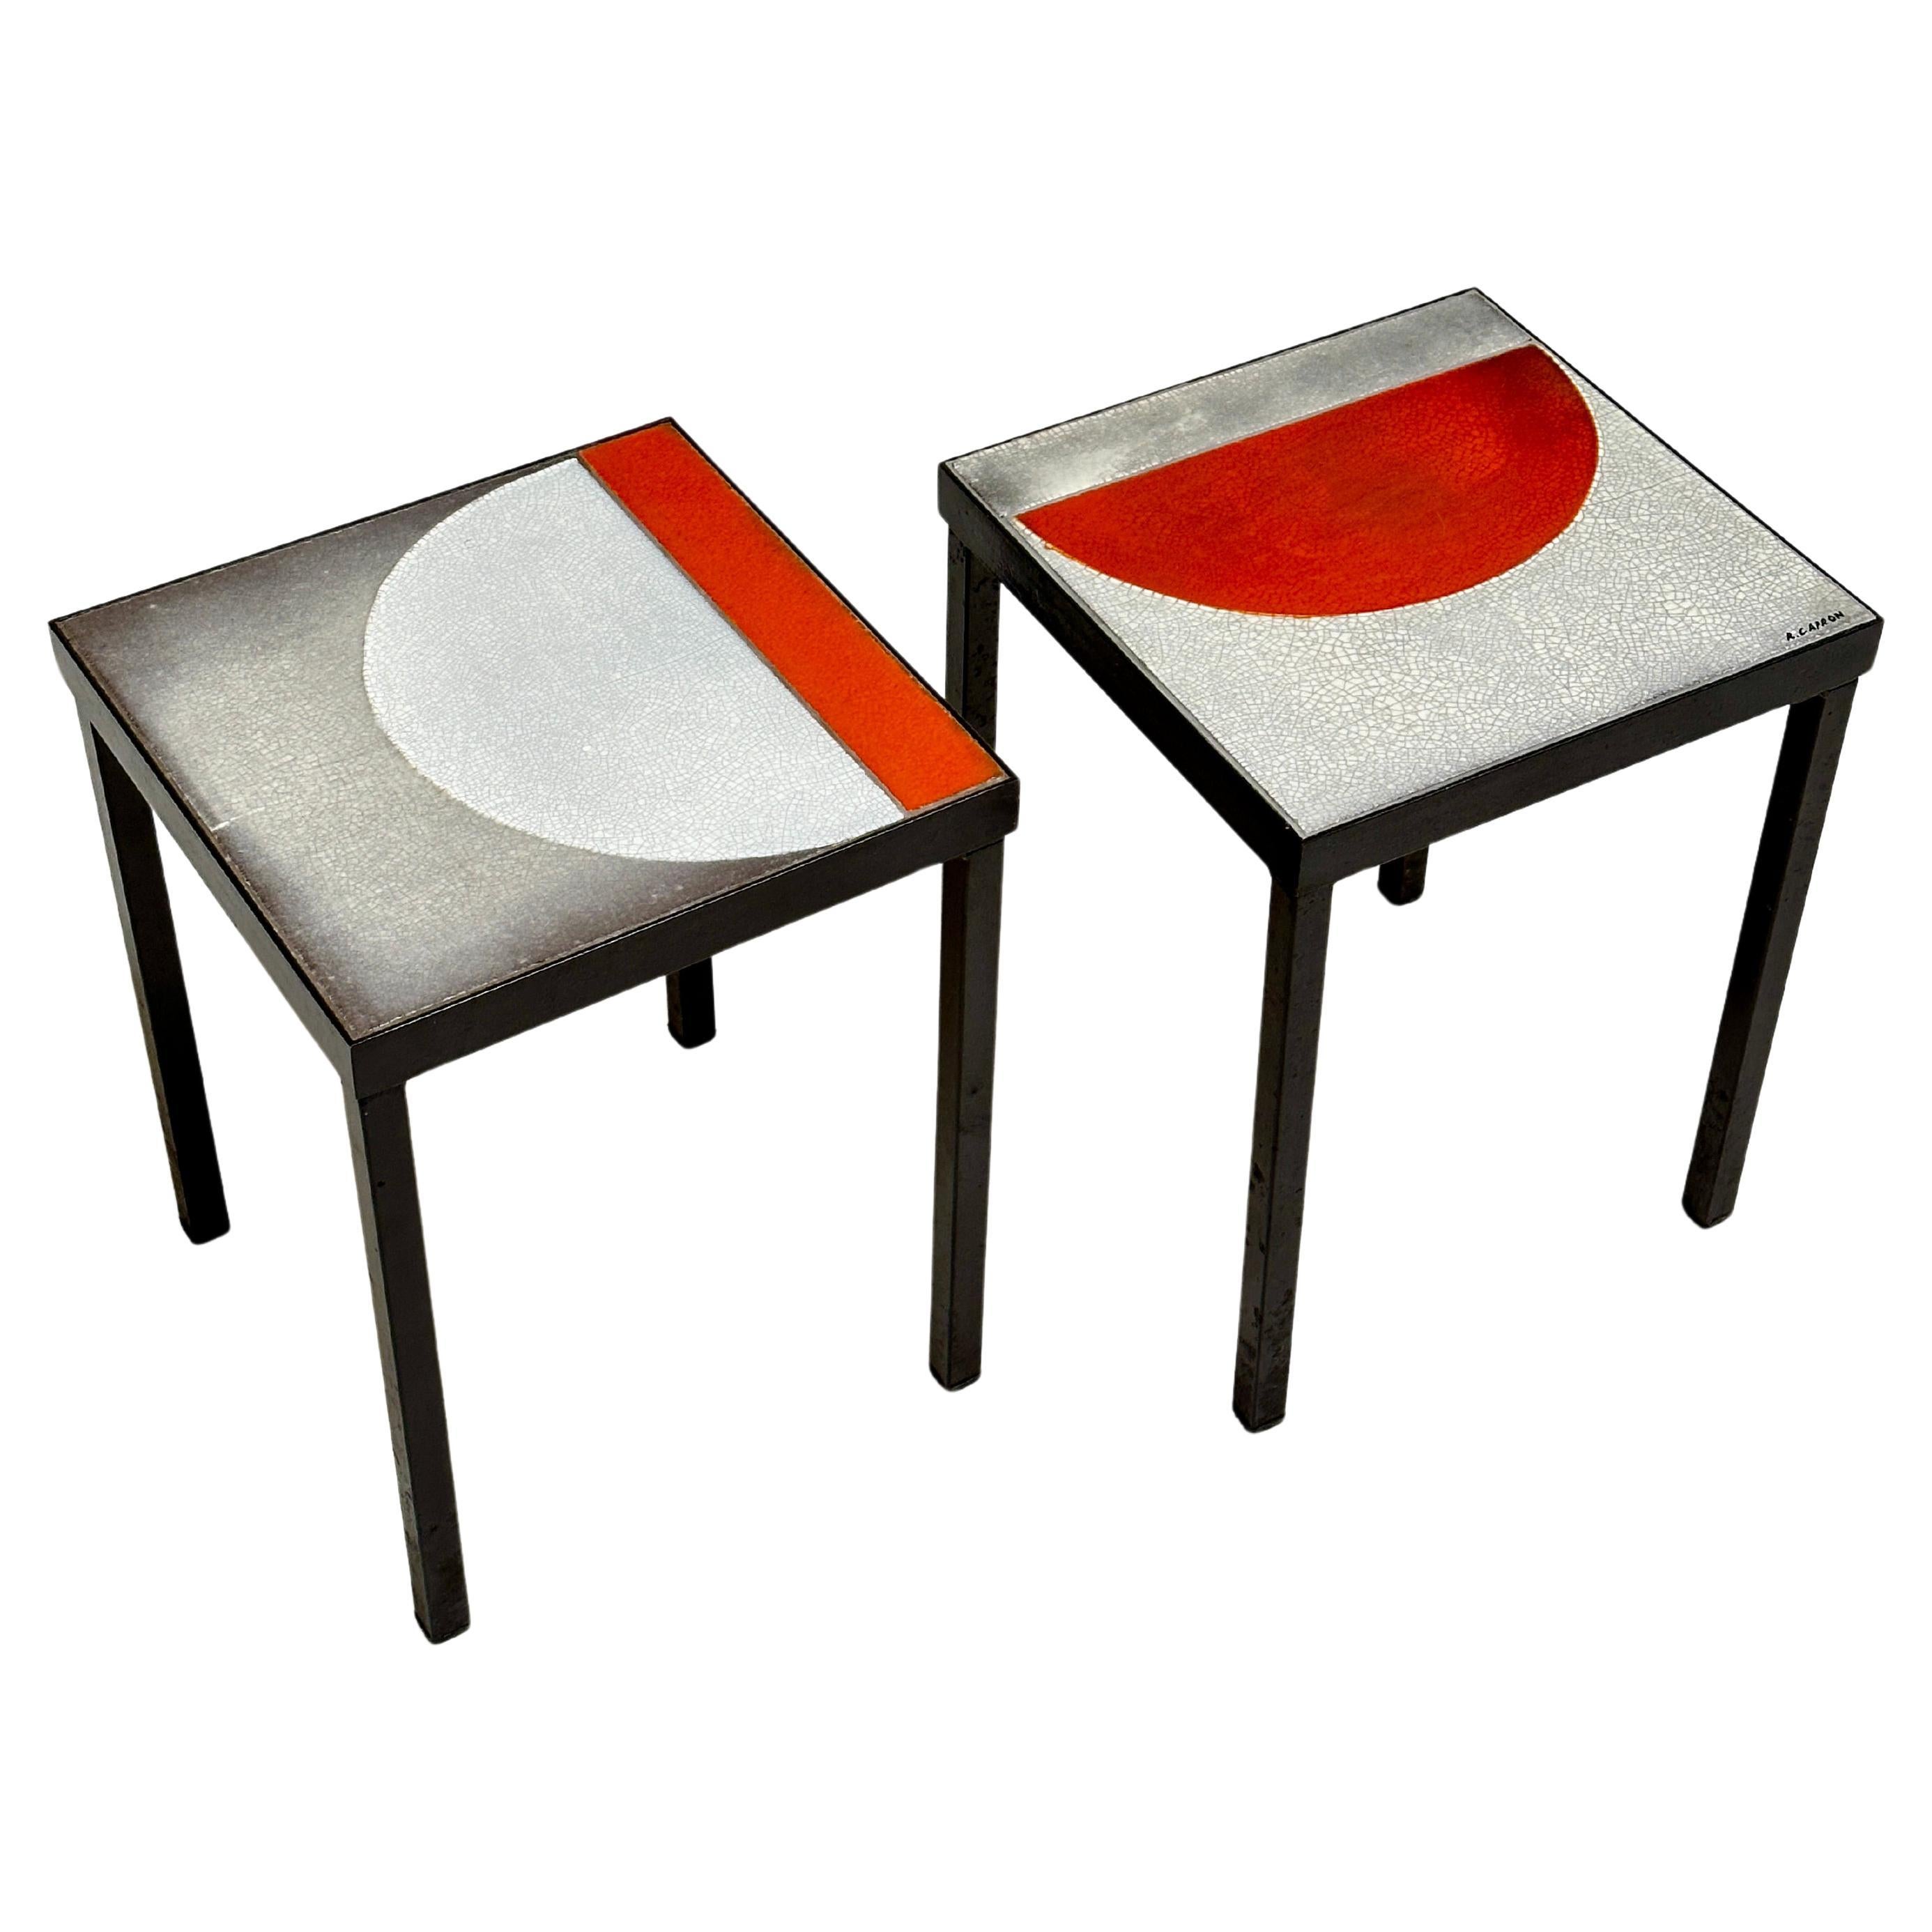 Pair of Low Tables, Roger Capron, Vallauris, c. 1965